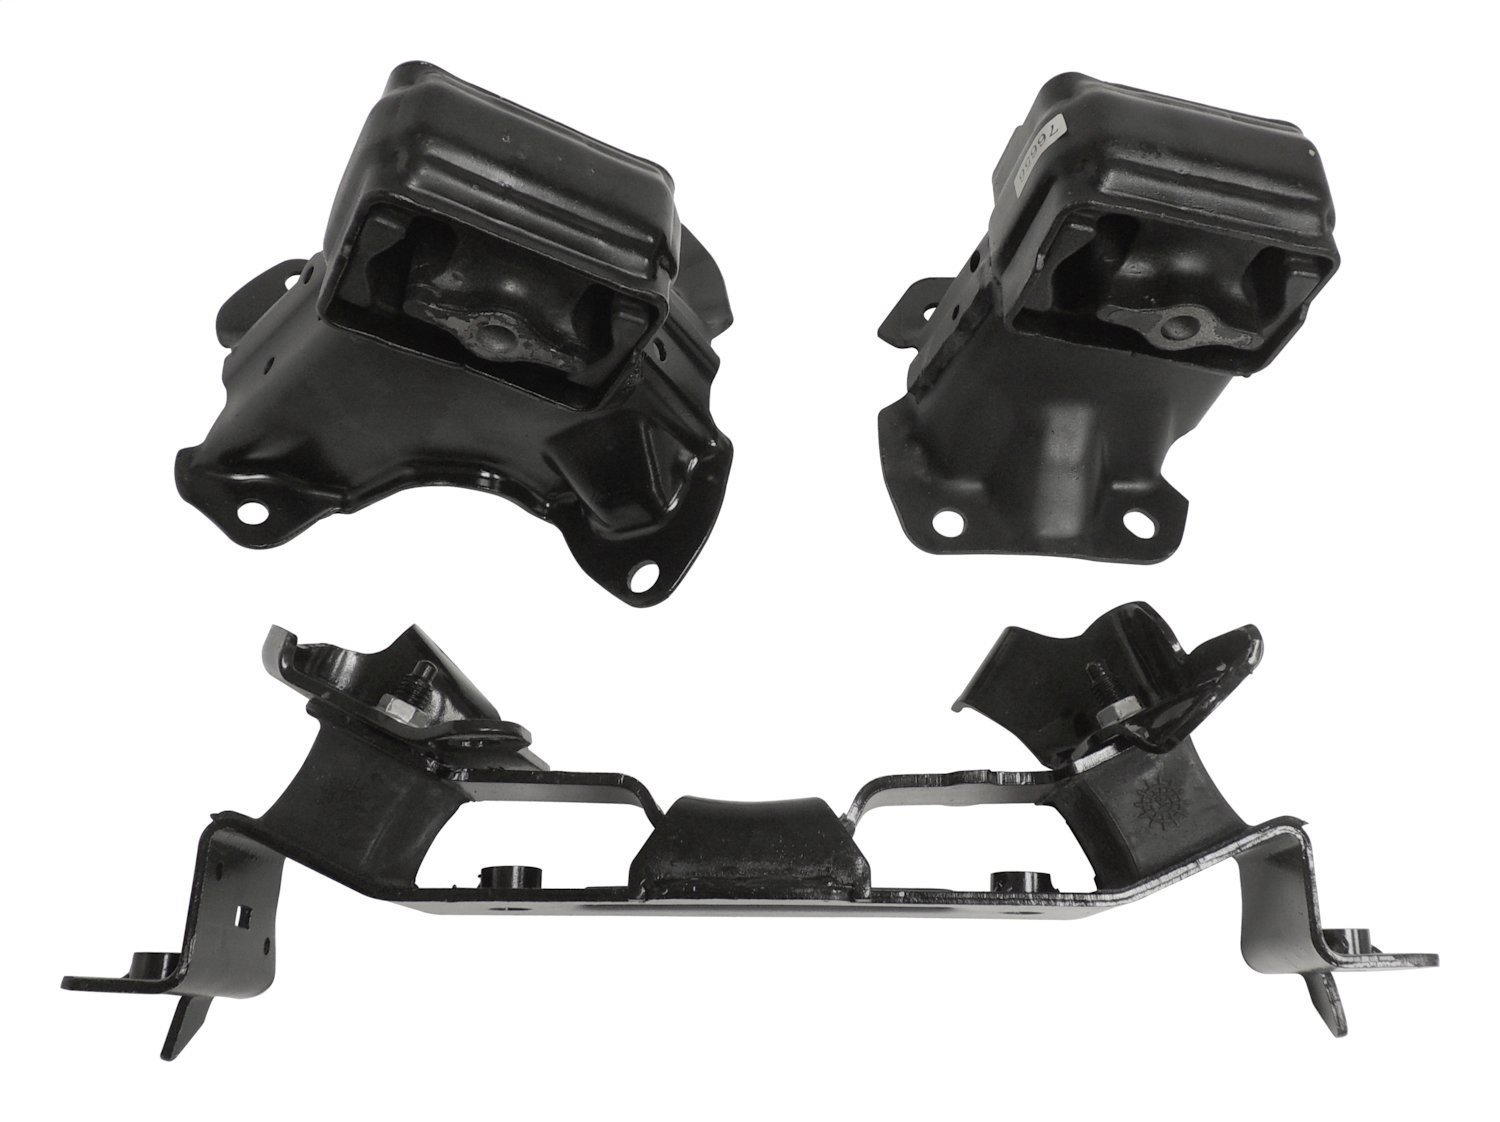 Engine & Transmission Mount Kit for Jeep Grand Cherokee & Jeep Commander with 3.7L V6